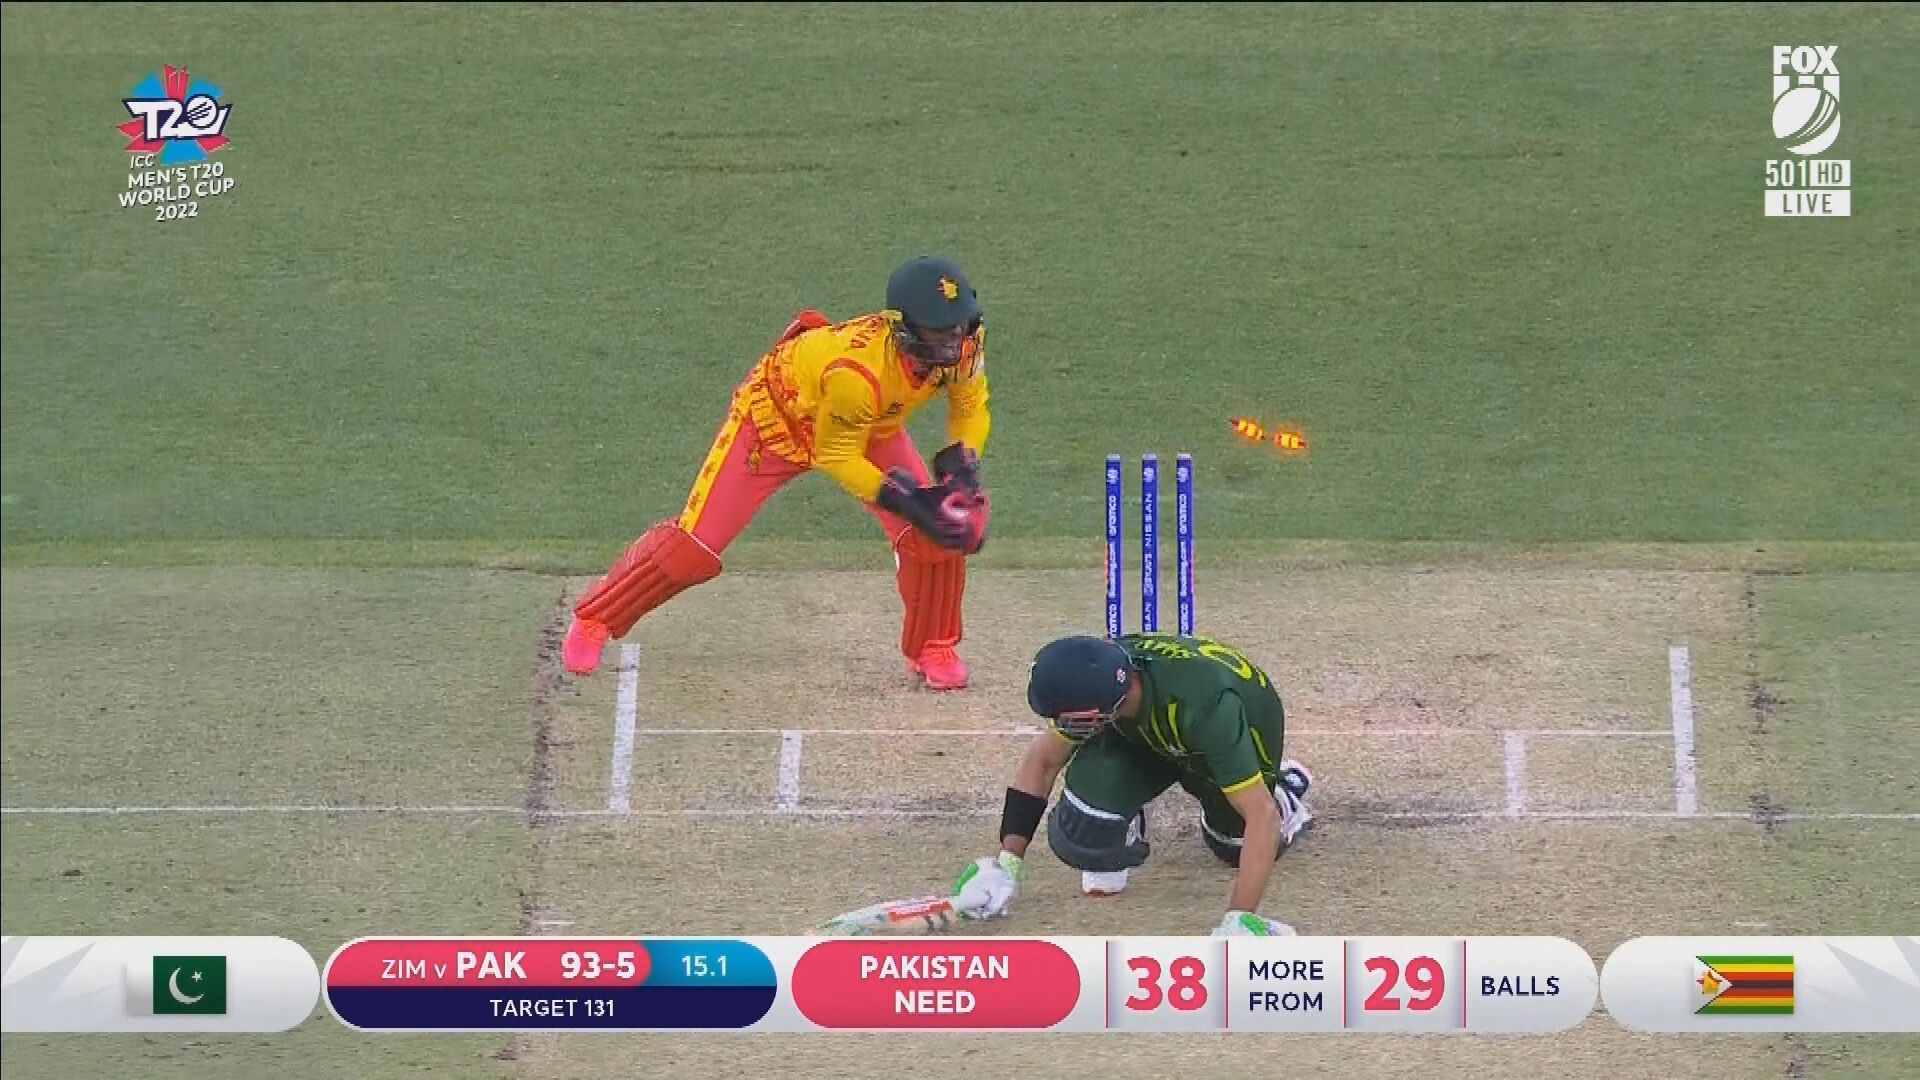 Pakistan suffers second straight heartbreaking loss at World Cup, going down to Zimbabwe by one run